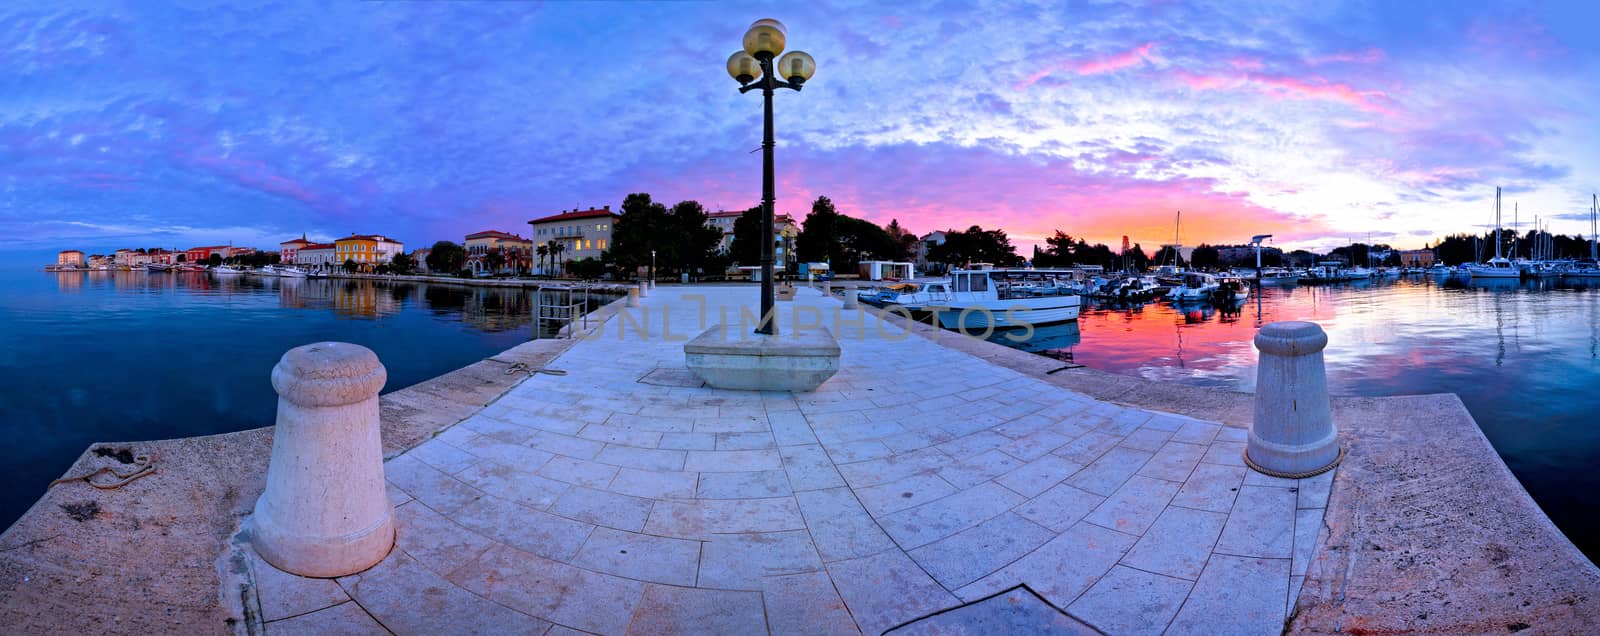 Town of Porec morning sunrise panoramic view from pier by xbrchx